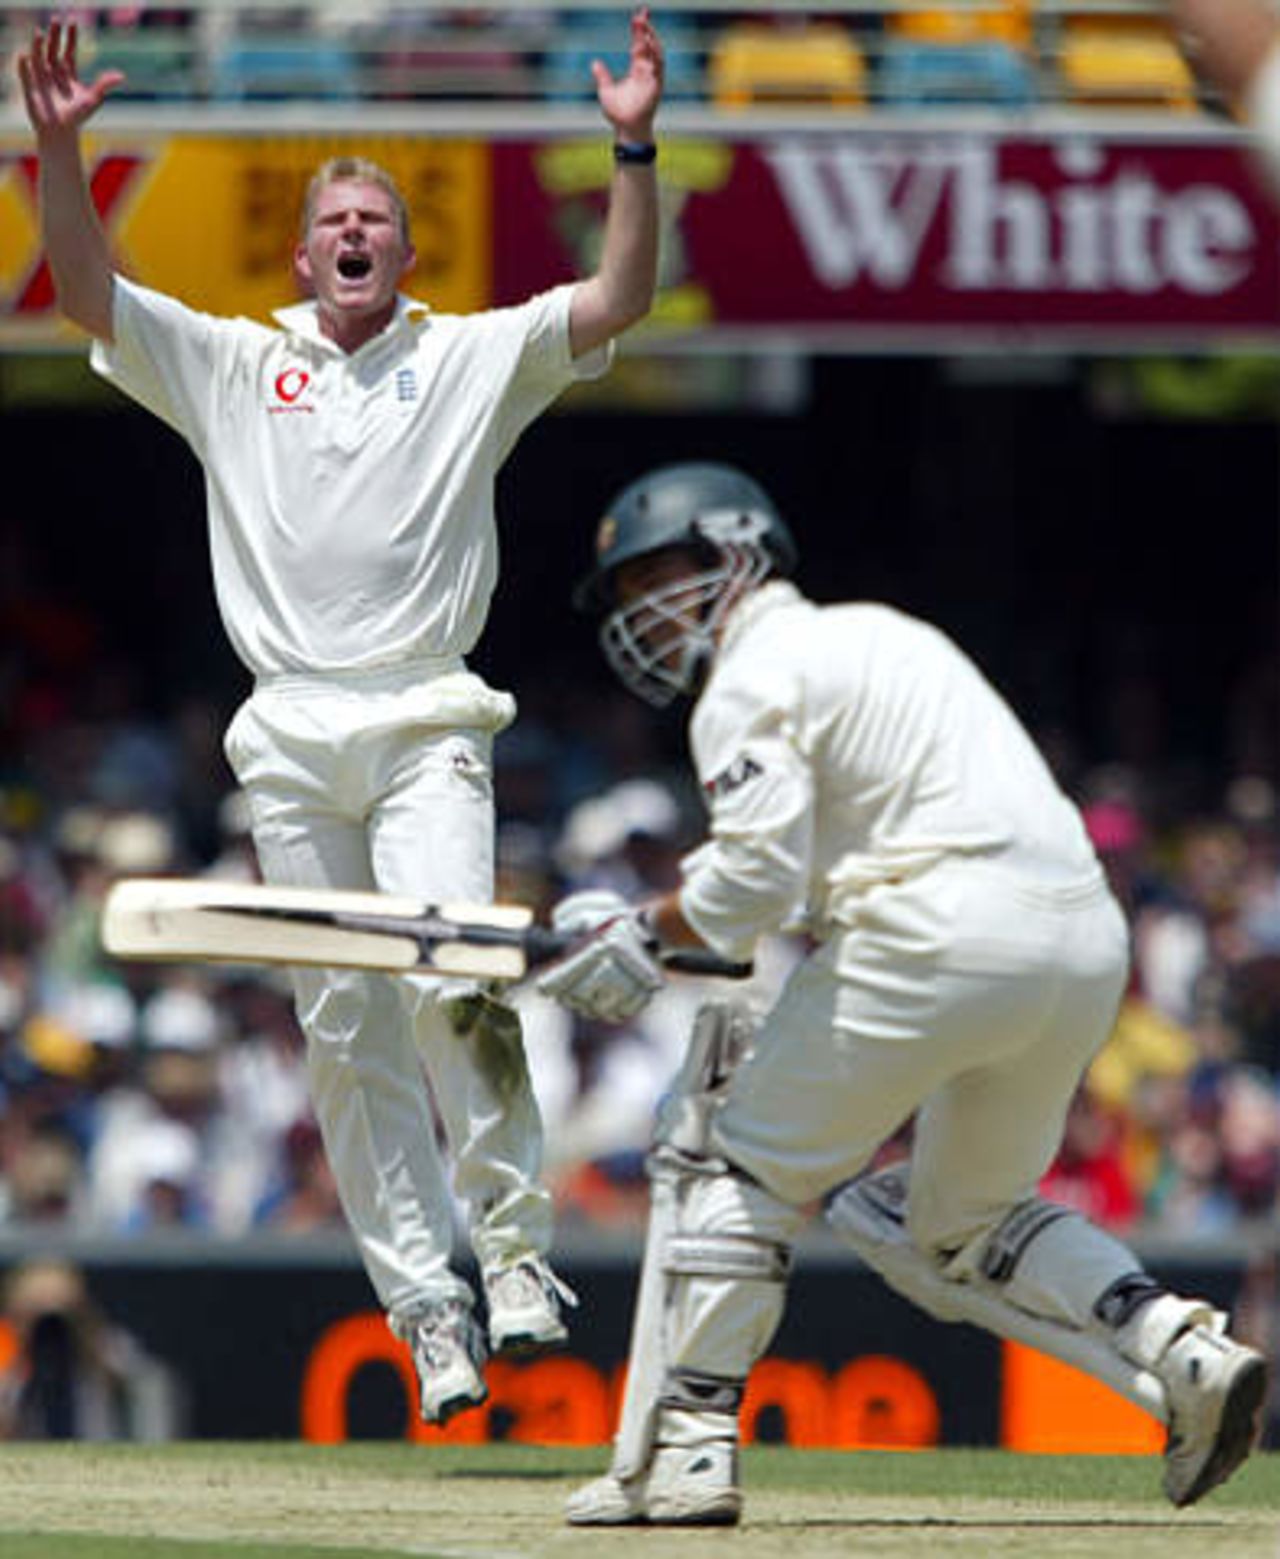 England's Matthew Hoggard (L) reacts as Australia's Justin Langer is nearly trapped LBW during the first day's play in the first Ashes test match at the Gabba in Brisbane November 7, 2002.